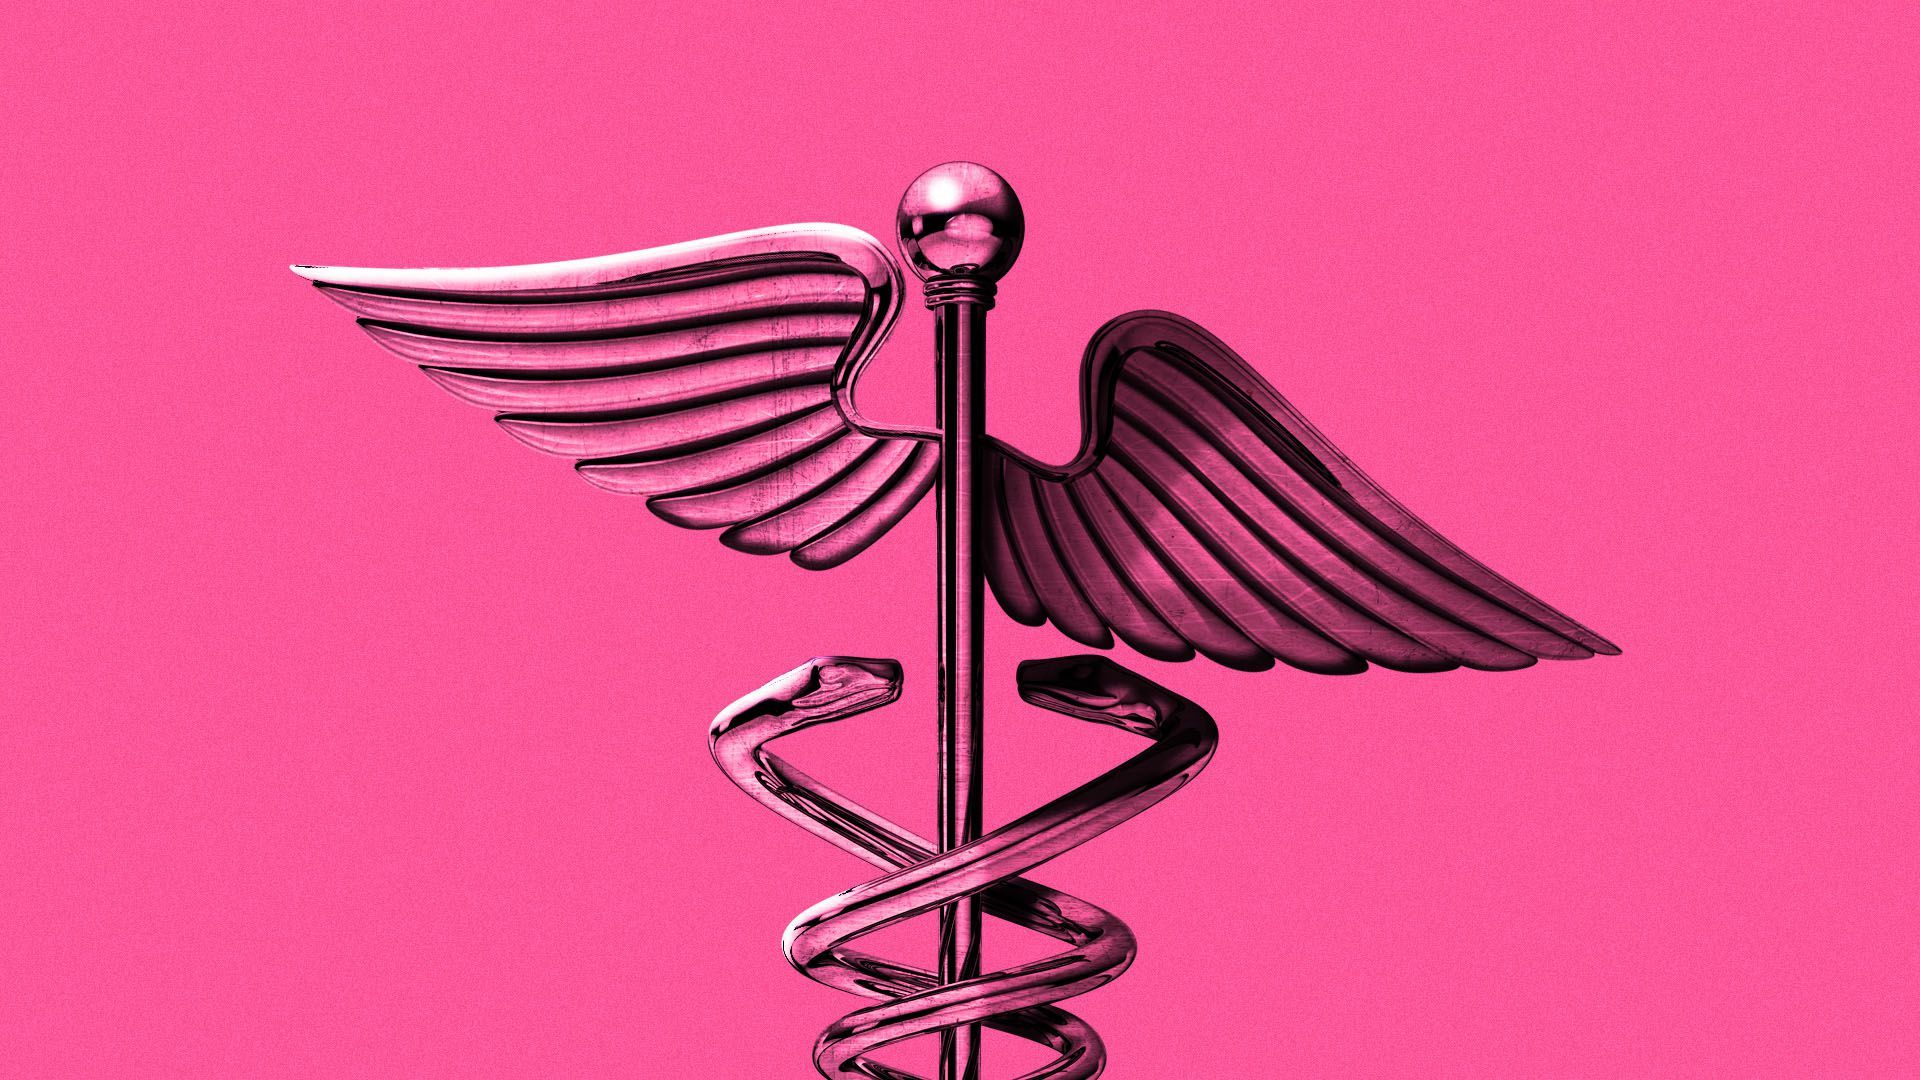 Illustration of a caduceus with uneven wings